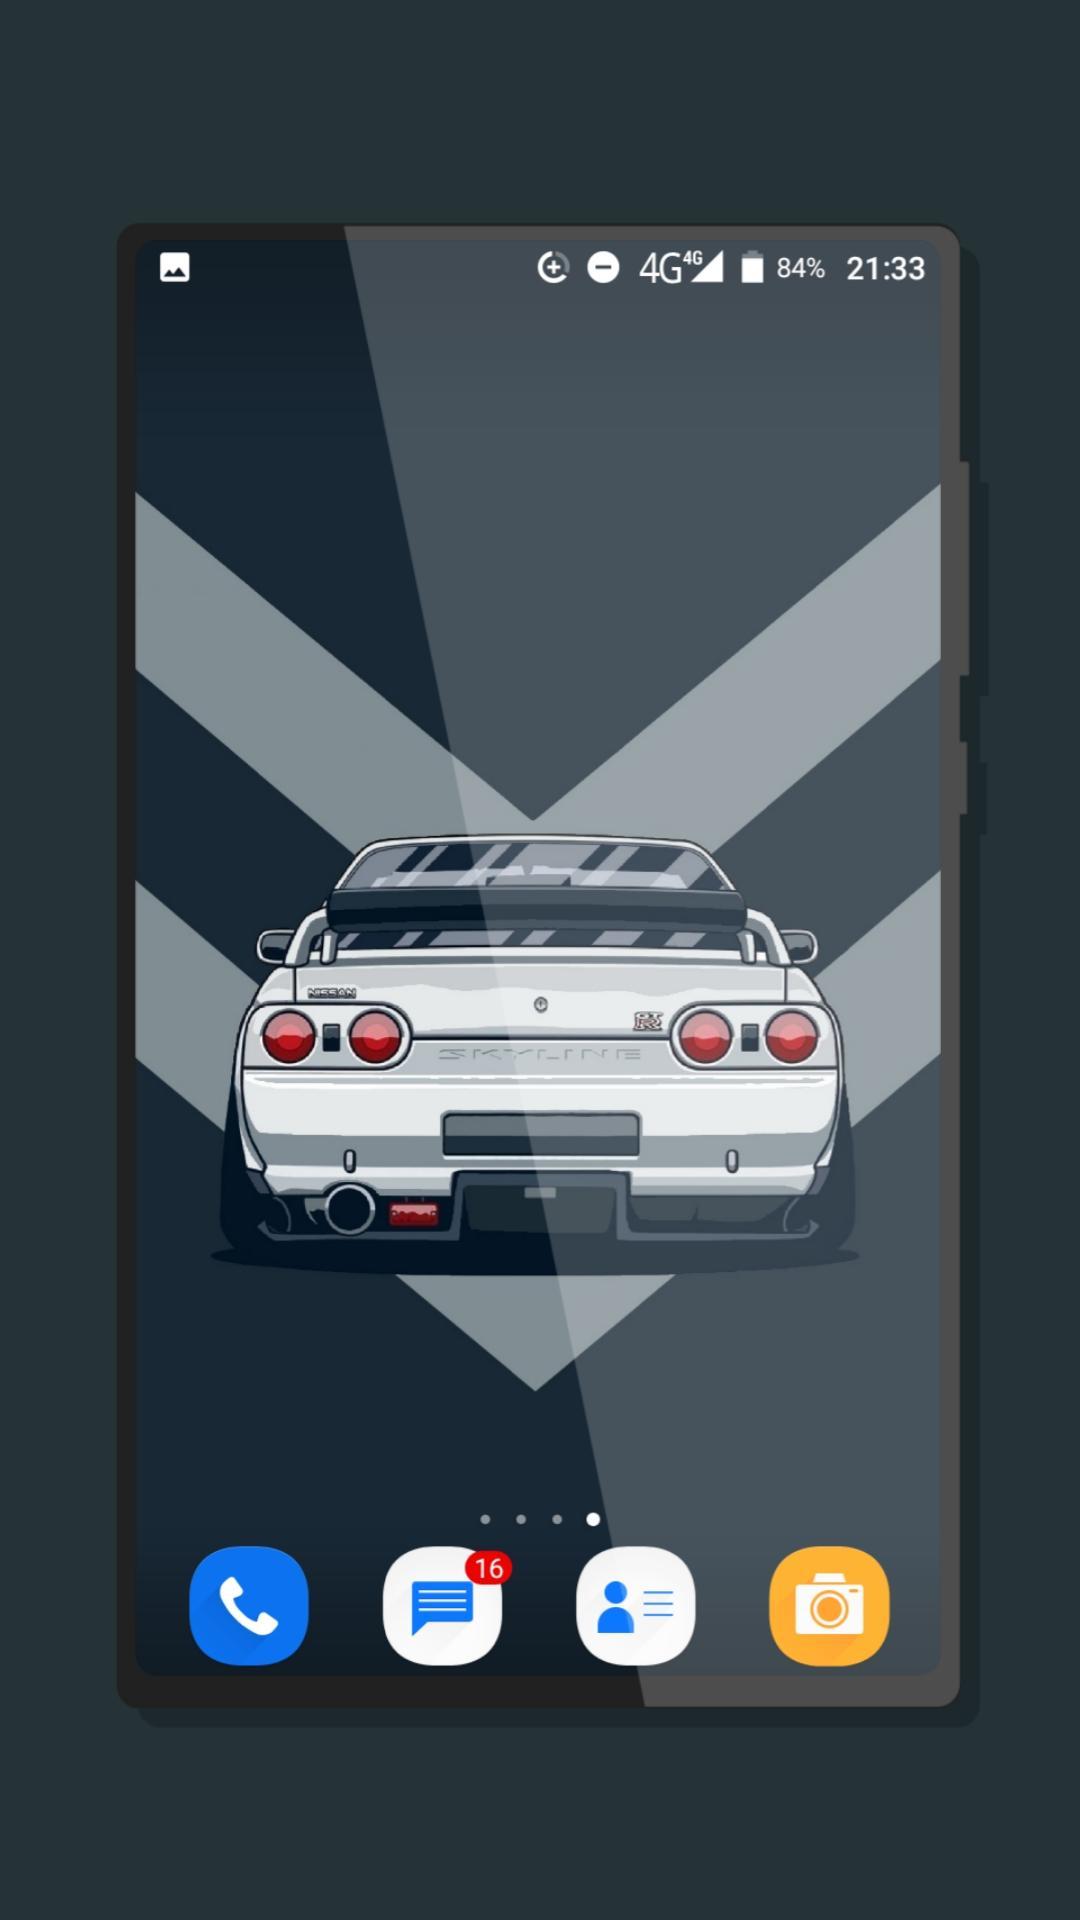 Jdm Cars Wallpaper For Android Apk Download